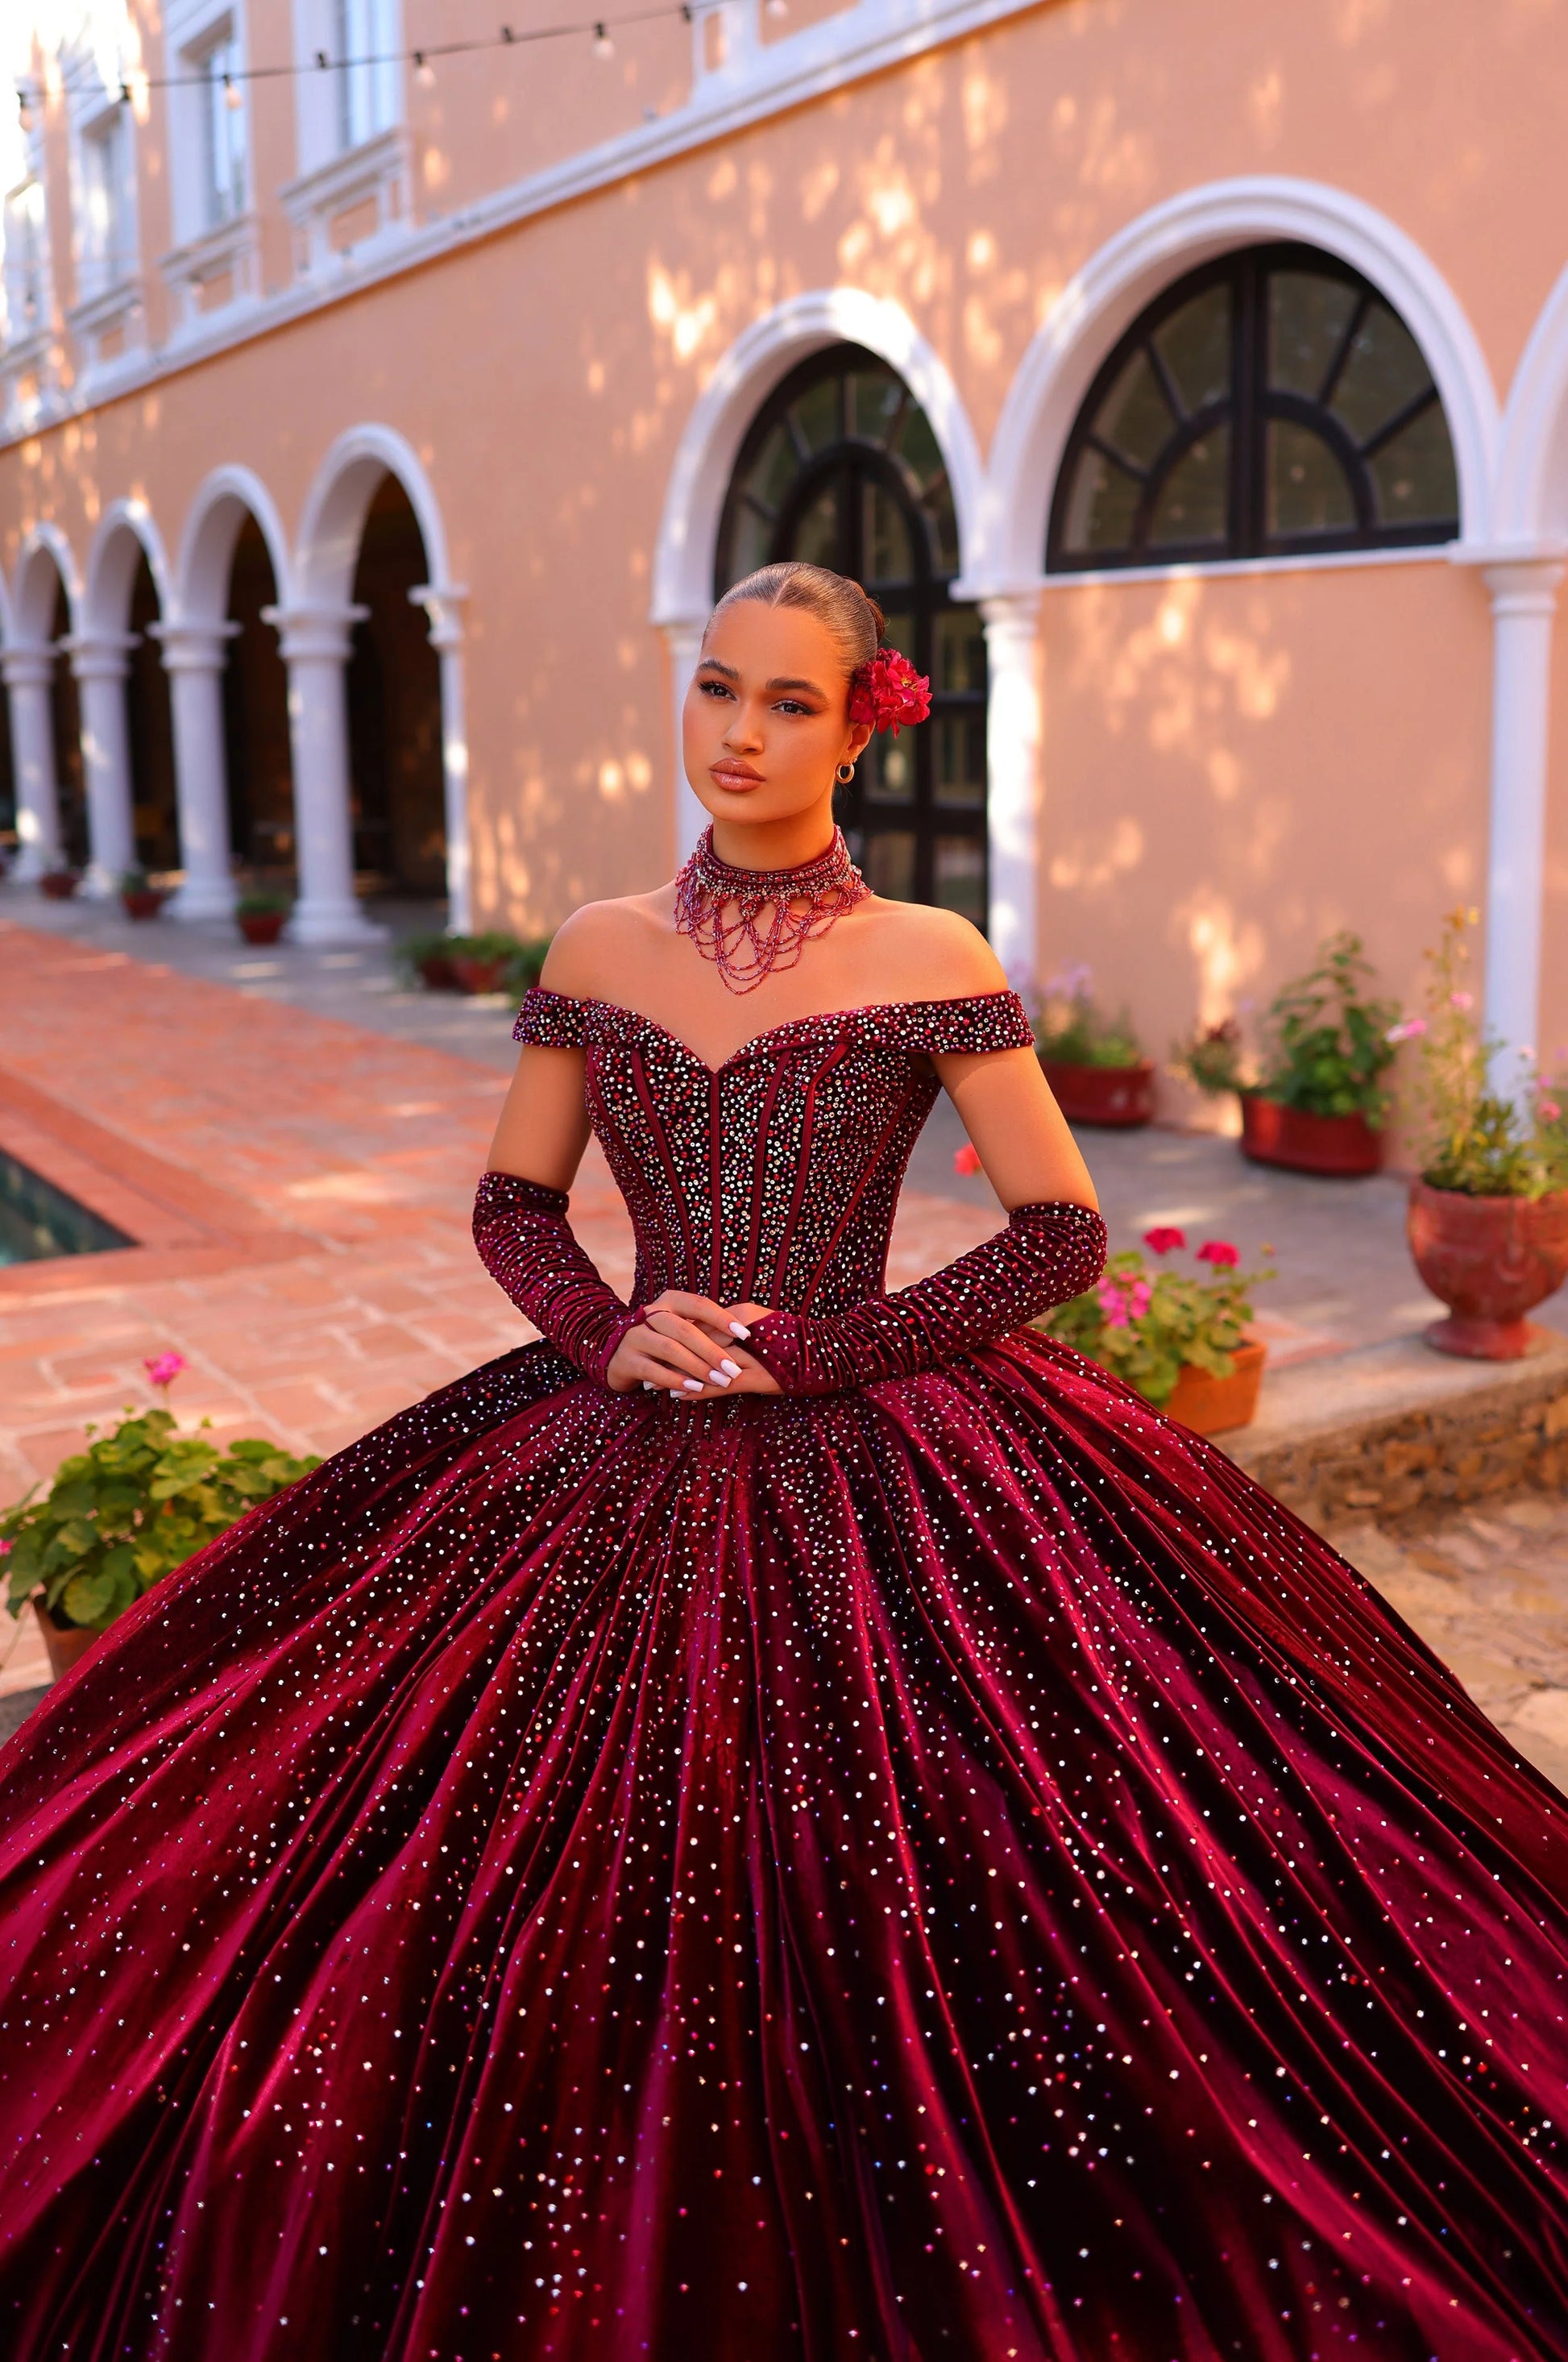 Elevate your quinceanera style with the luxurious Amarra 54257 dress. Made of velvet and adorned with crystal accents, it features a ball gown silhouette with an off-the-shoulder neckline. Complete the look with the included corset necklace and velvet gloves. A perfect choice for a night to remember.